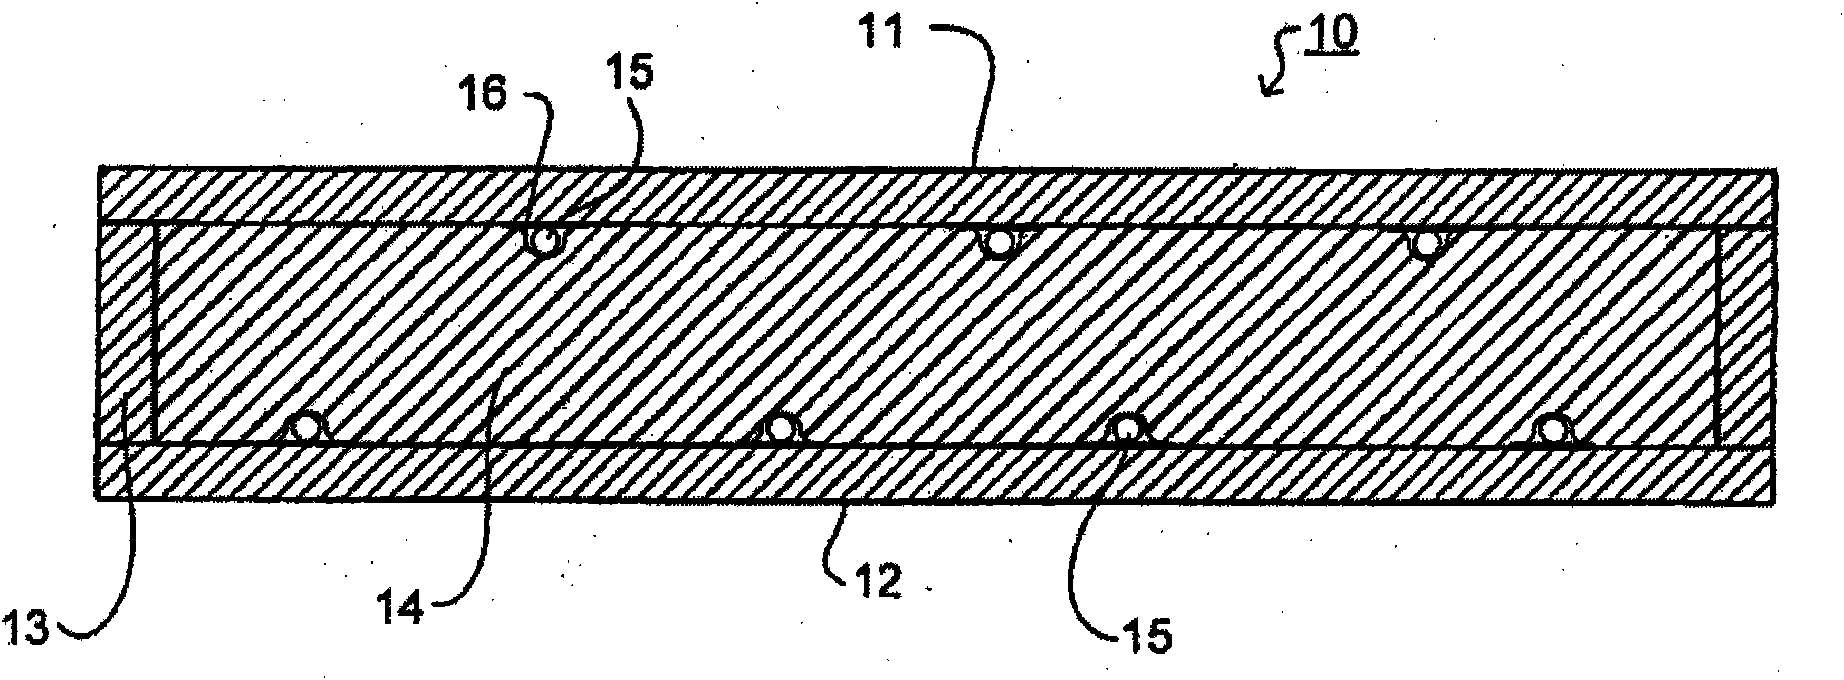 Improved structural sandwich plate panels and methods of making the same